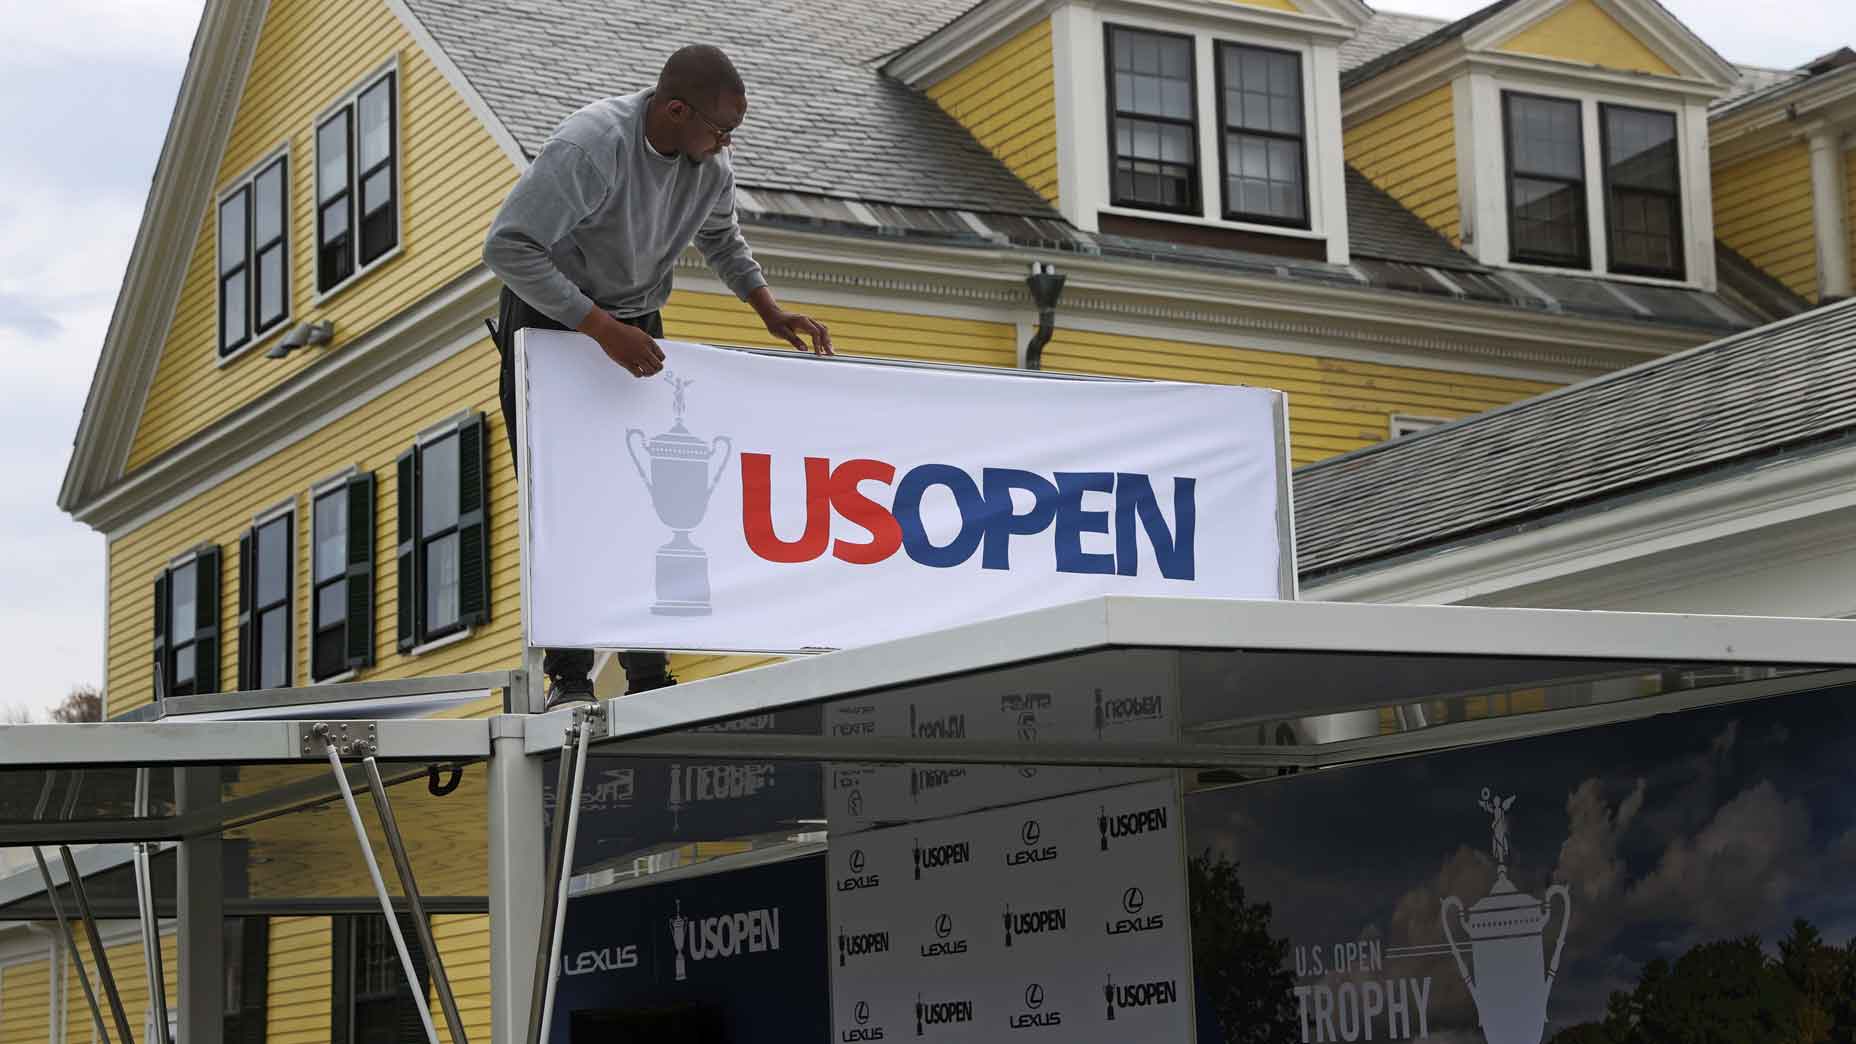 US Open sign at the 2022 US Open